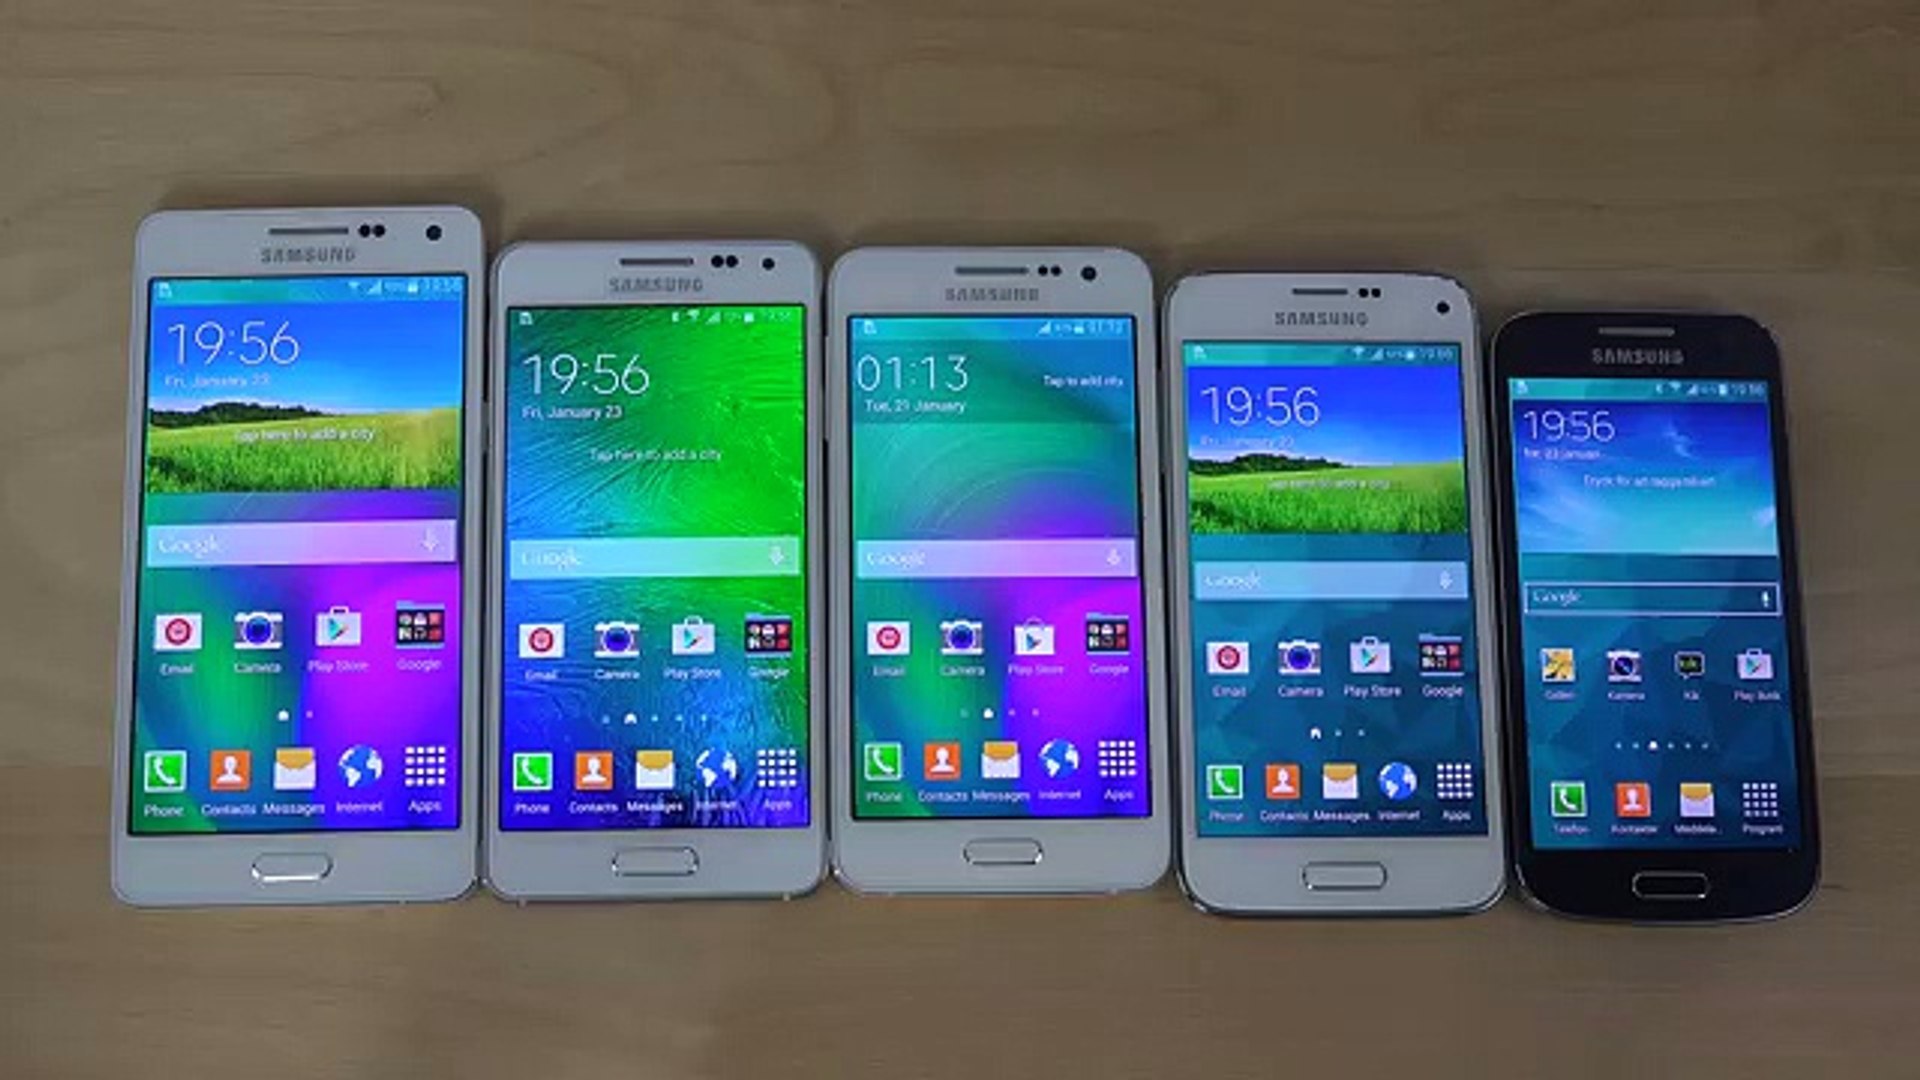 Samsung Galaxy A5 vs. Galaxy A3 vs. Galaxy Alpha vs. S5 Mini vs. S4 Mini -  Which Is Faster - video Dailymotion